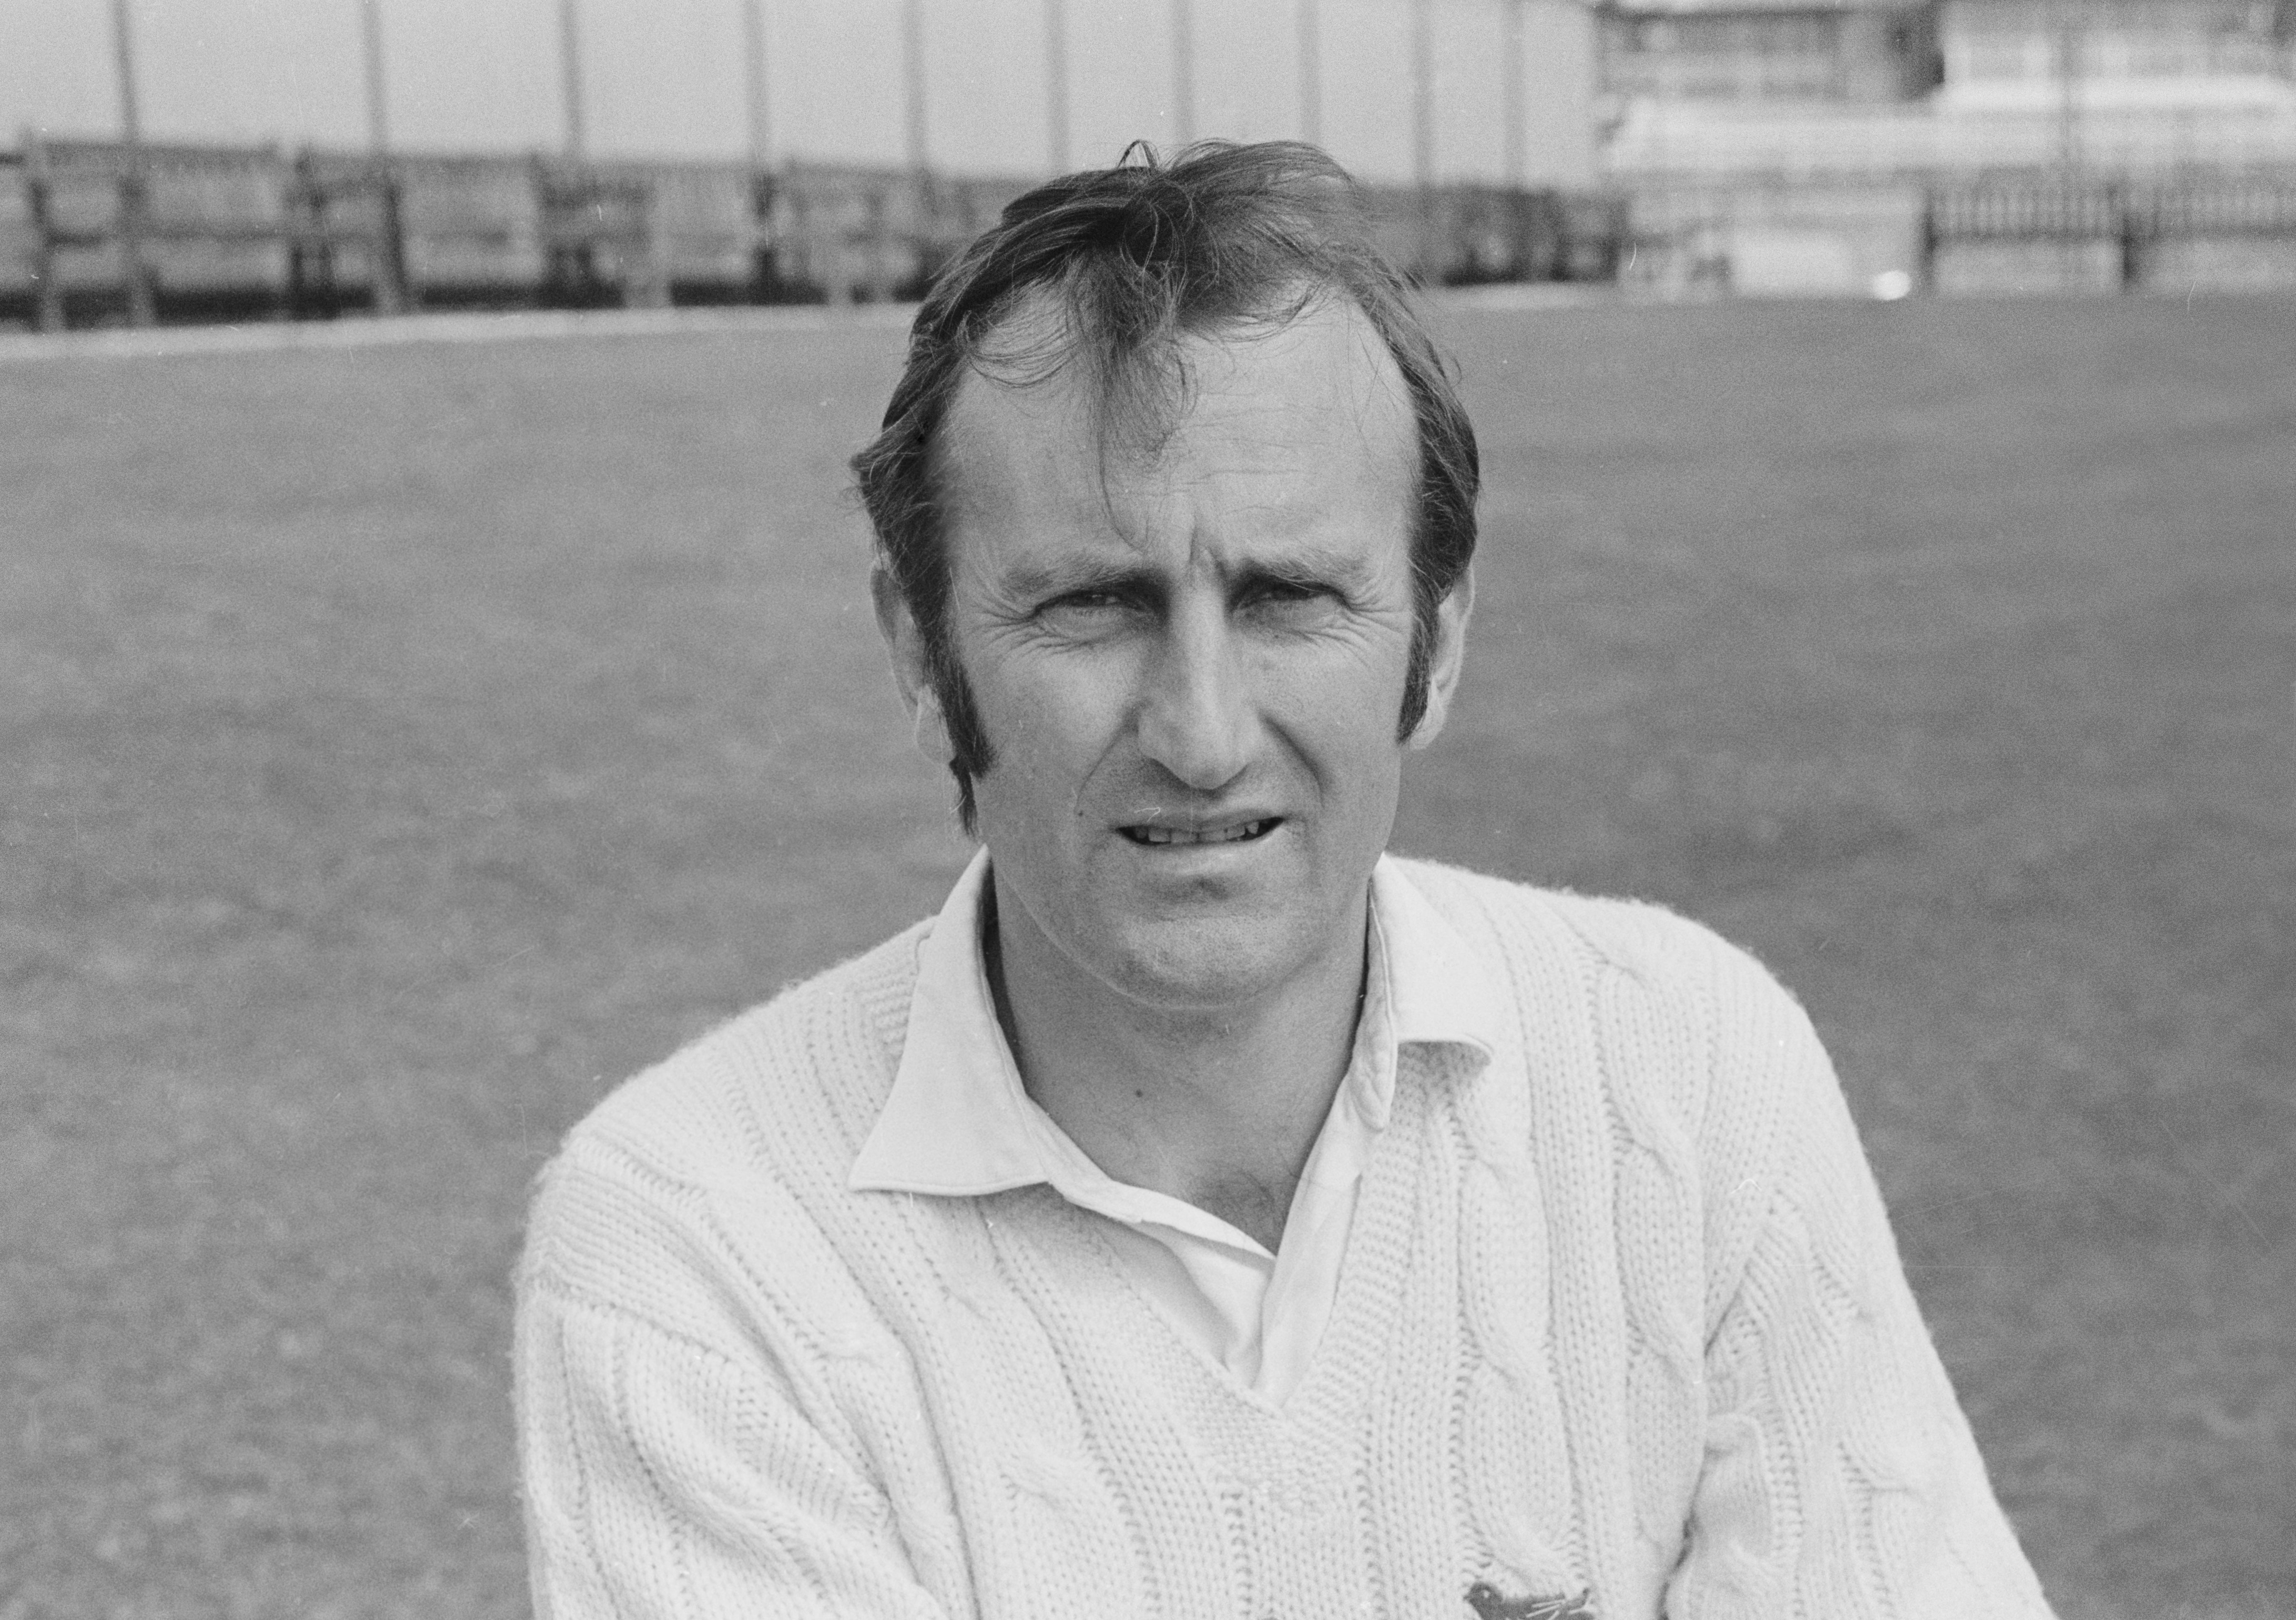 Dexter captained the England Test team 30 times